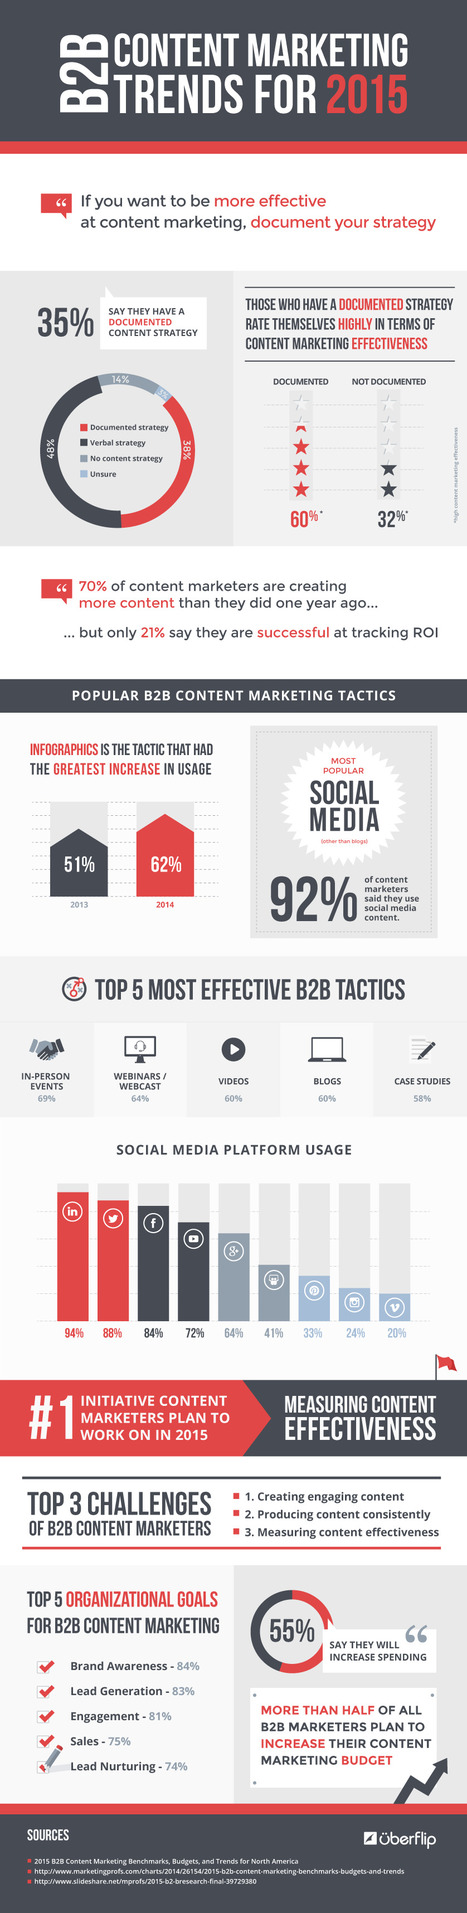 2015 Social Media and Content Trends for B2B Marketers [INFOGRAPHIC] | MarketingHits | Scoop.it